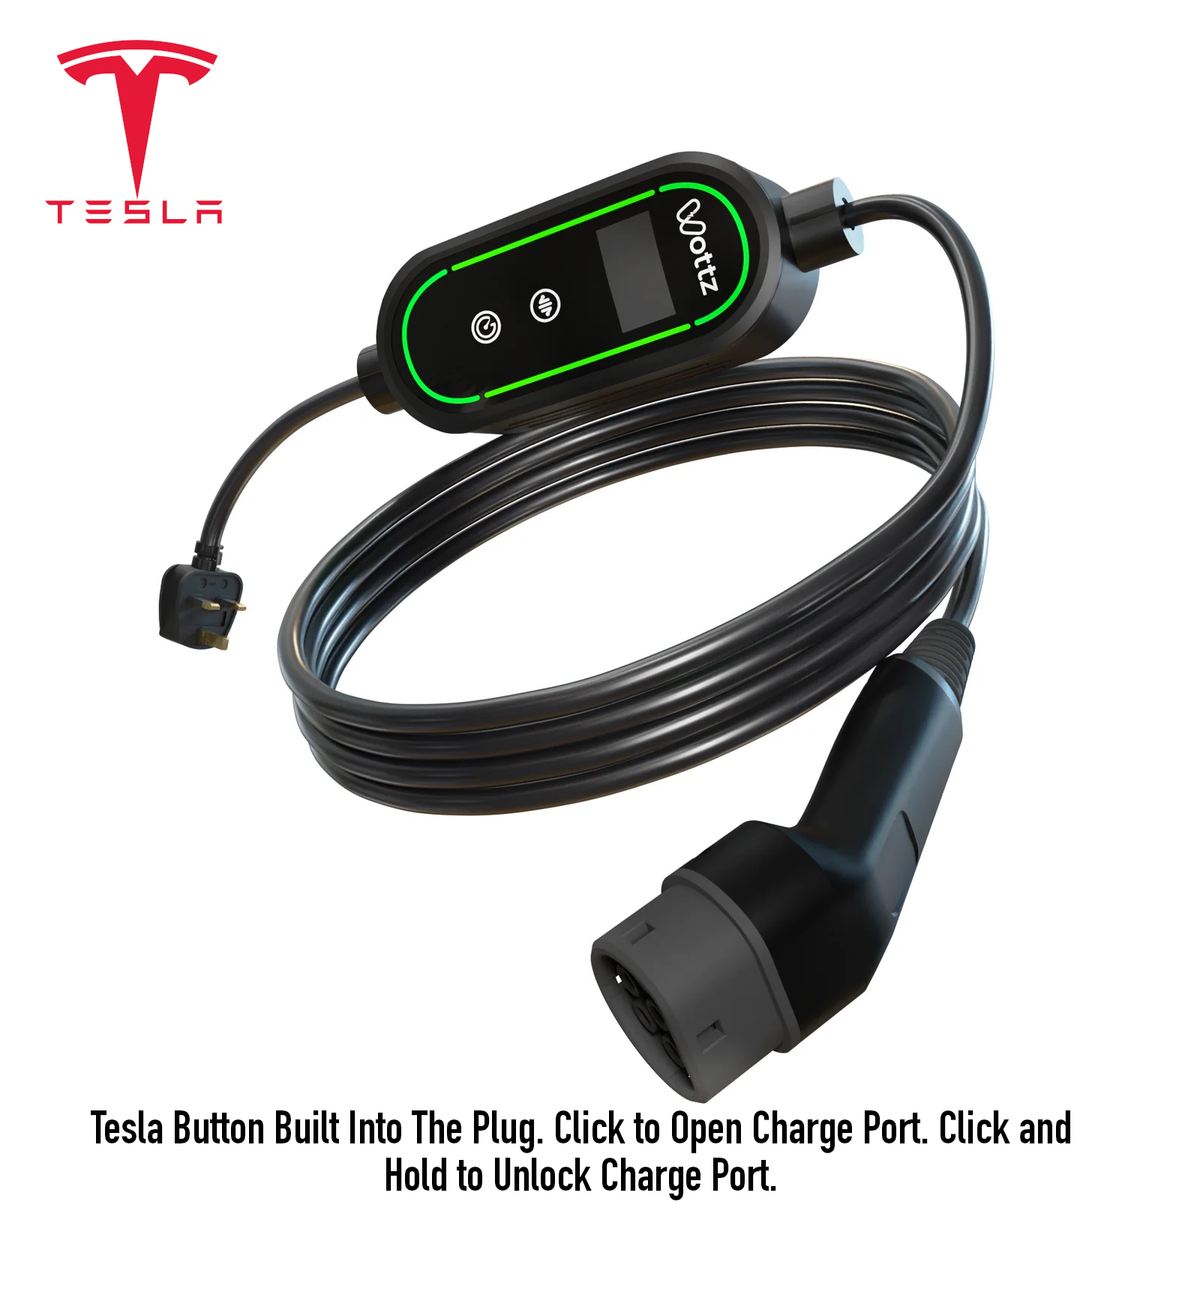 Tesla Charging Cables